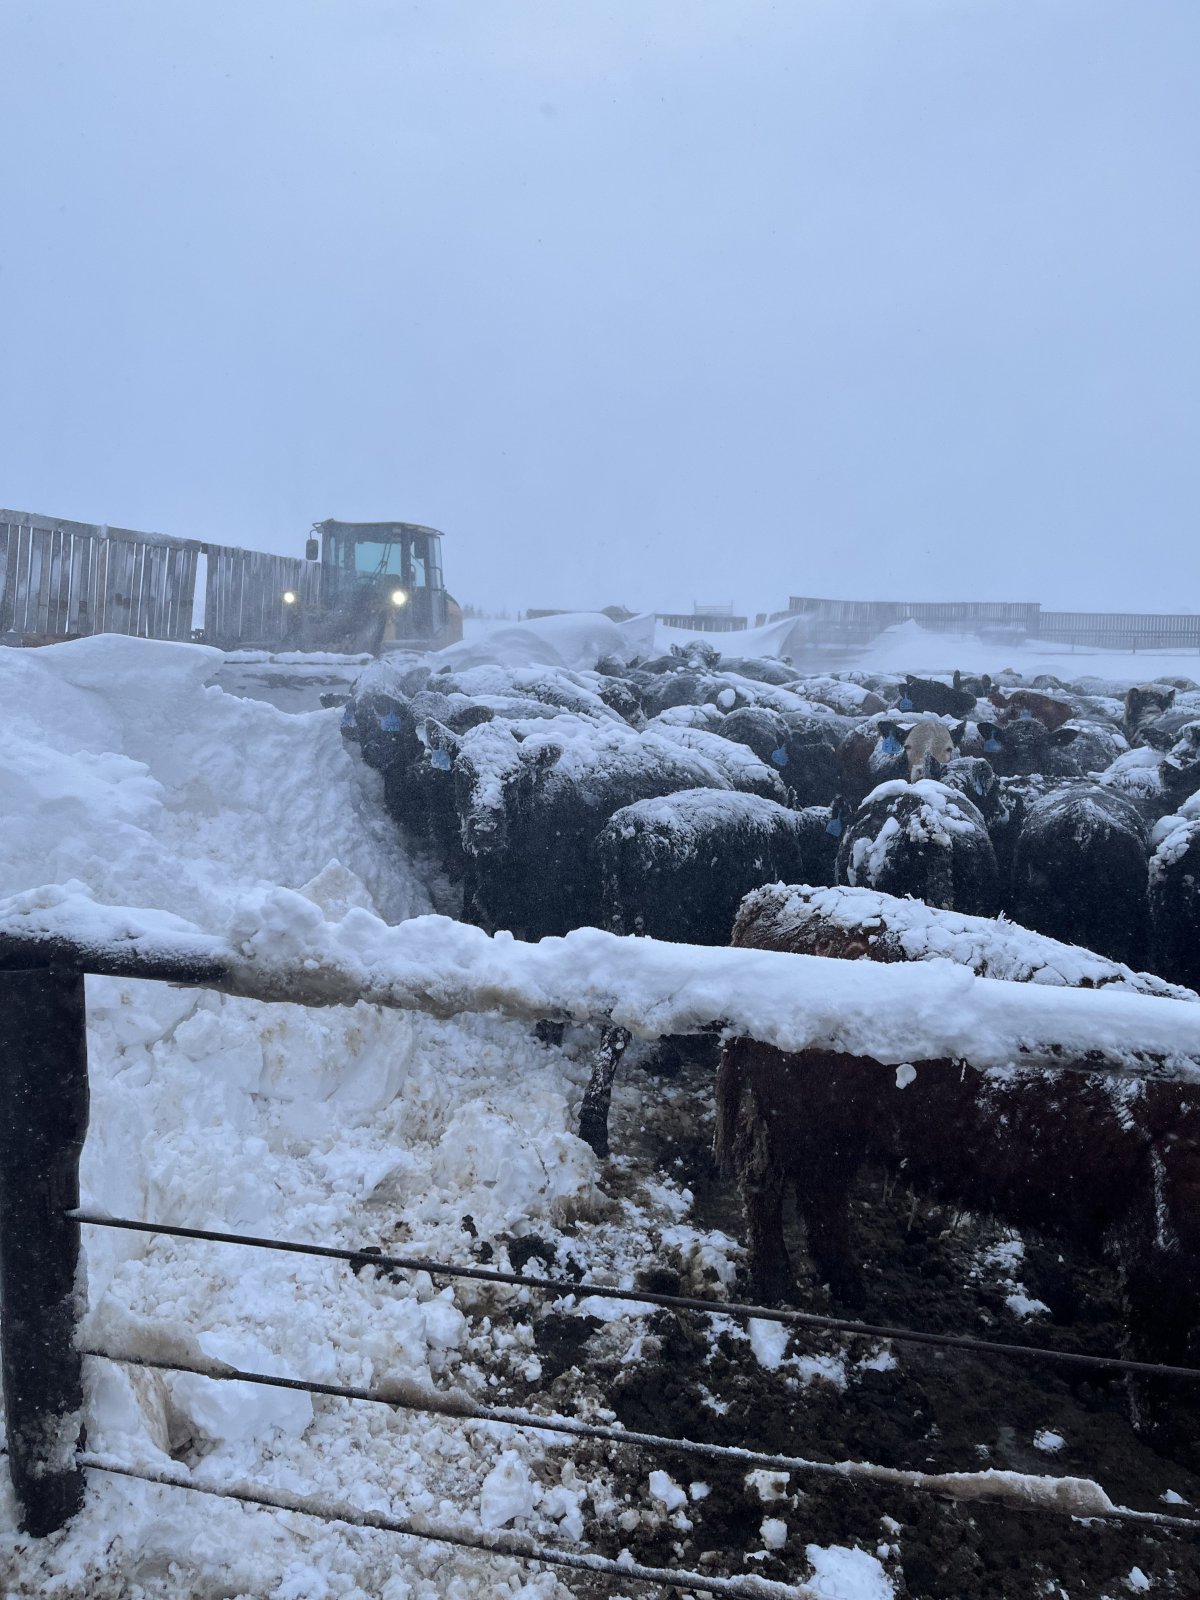 Some of Chad Ross' cattle during the April blizzard at his ranch in Estevan, Sask.